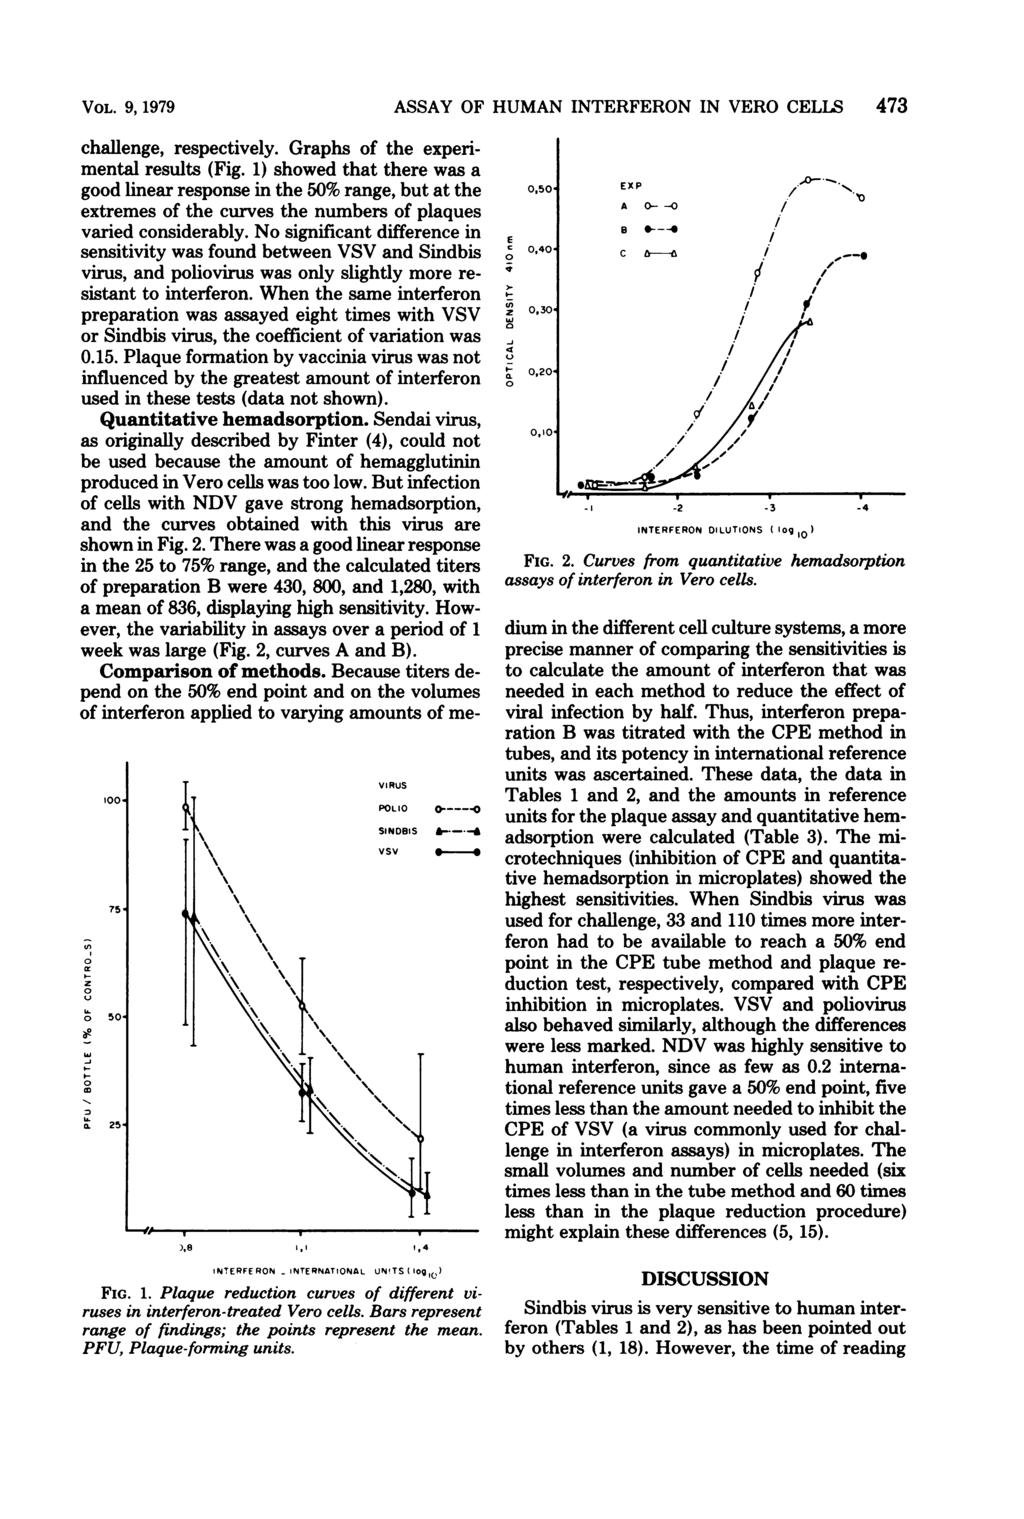 VOL. 9, 1979 I- z 0 I- to a. 100. 75' challenge, respectively. Graphs of the experimental results (Fig.